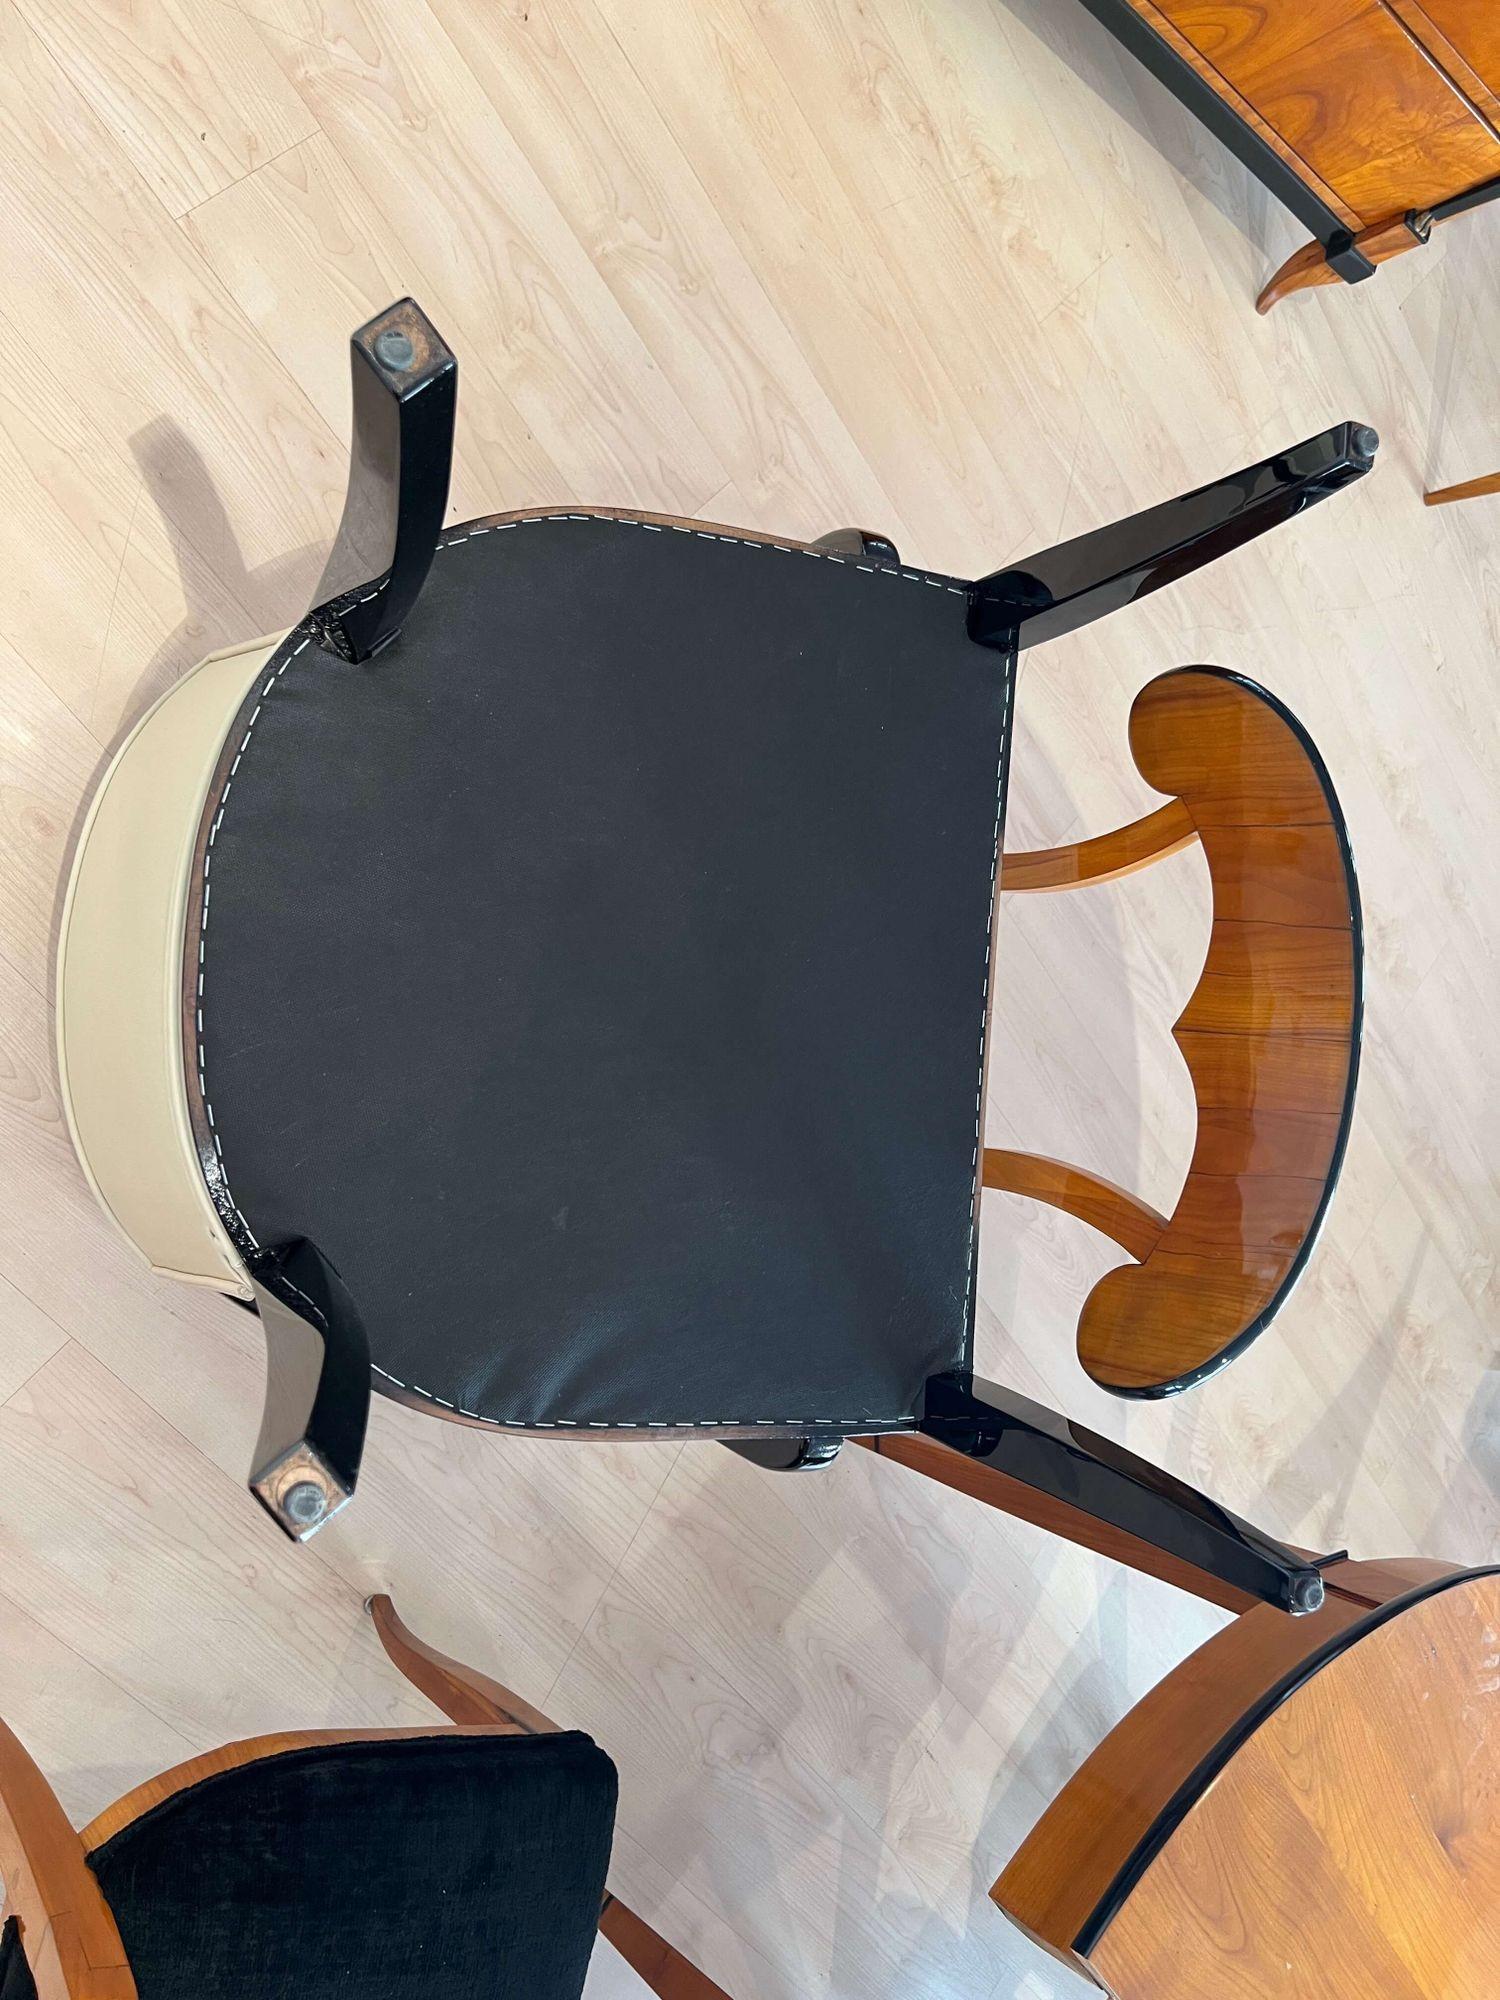 Pair of Art Deco Armchairs, Black Lacquer, Creme Leather, France, 1930s For Sale 9